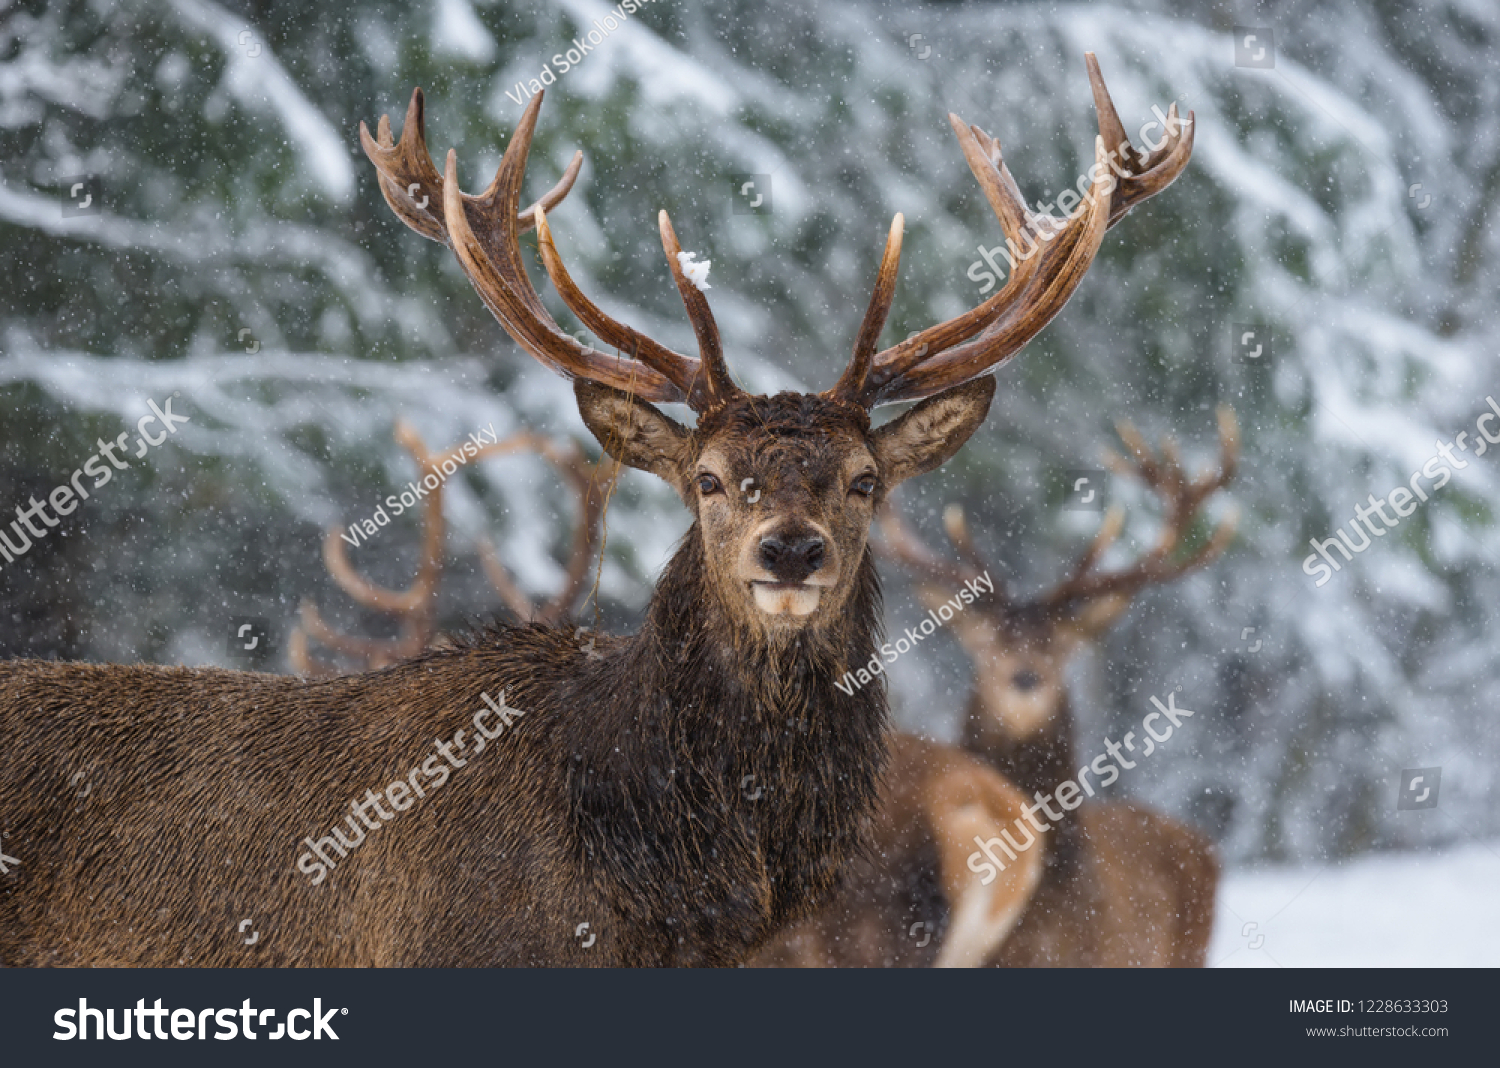 Great Adult Noble Red Deer With Big Horns, Look At You. Portrait Of Great Stag With Big Antlers At Winter Forest Background. Lonely Stag Under Falling Snowflakes.Belarus. #1228633303